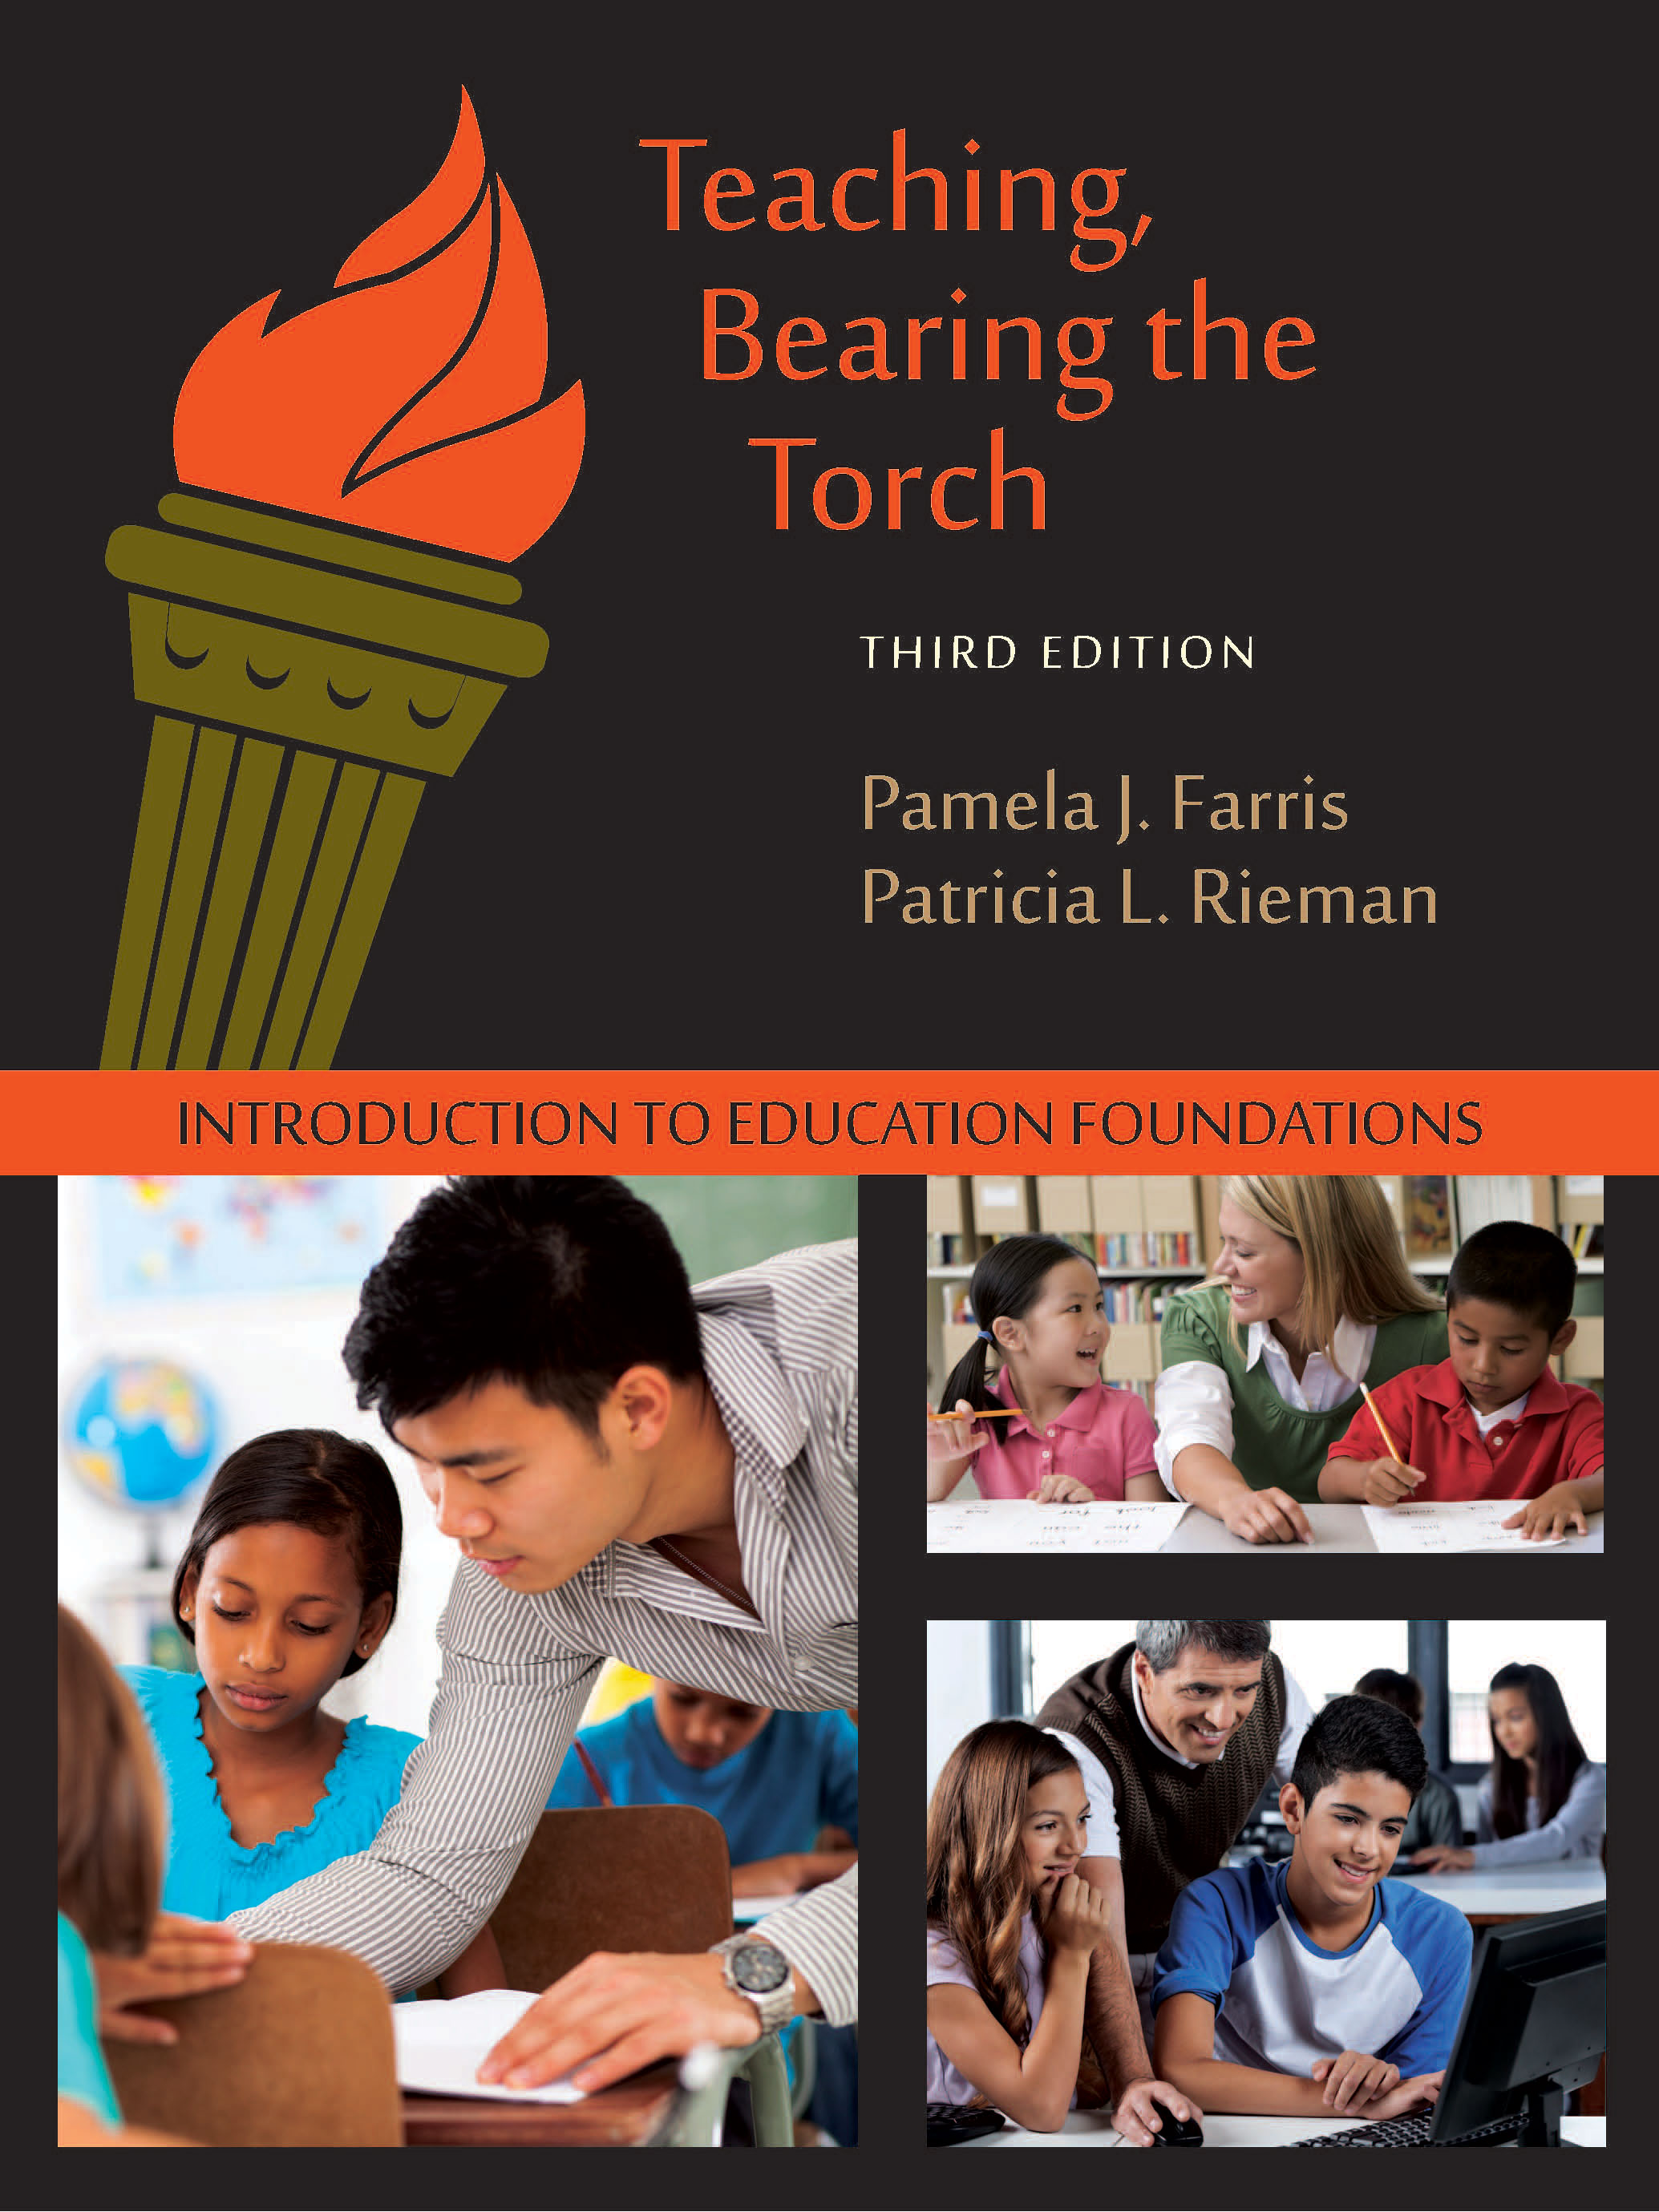 Teaching, Bearing the Torch: Introduction to Education Foundations, Third Edition by Pamela J. Farris, Patricia L. Rieman